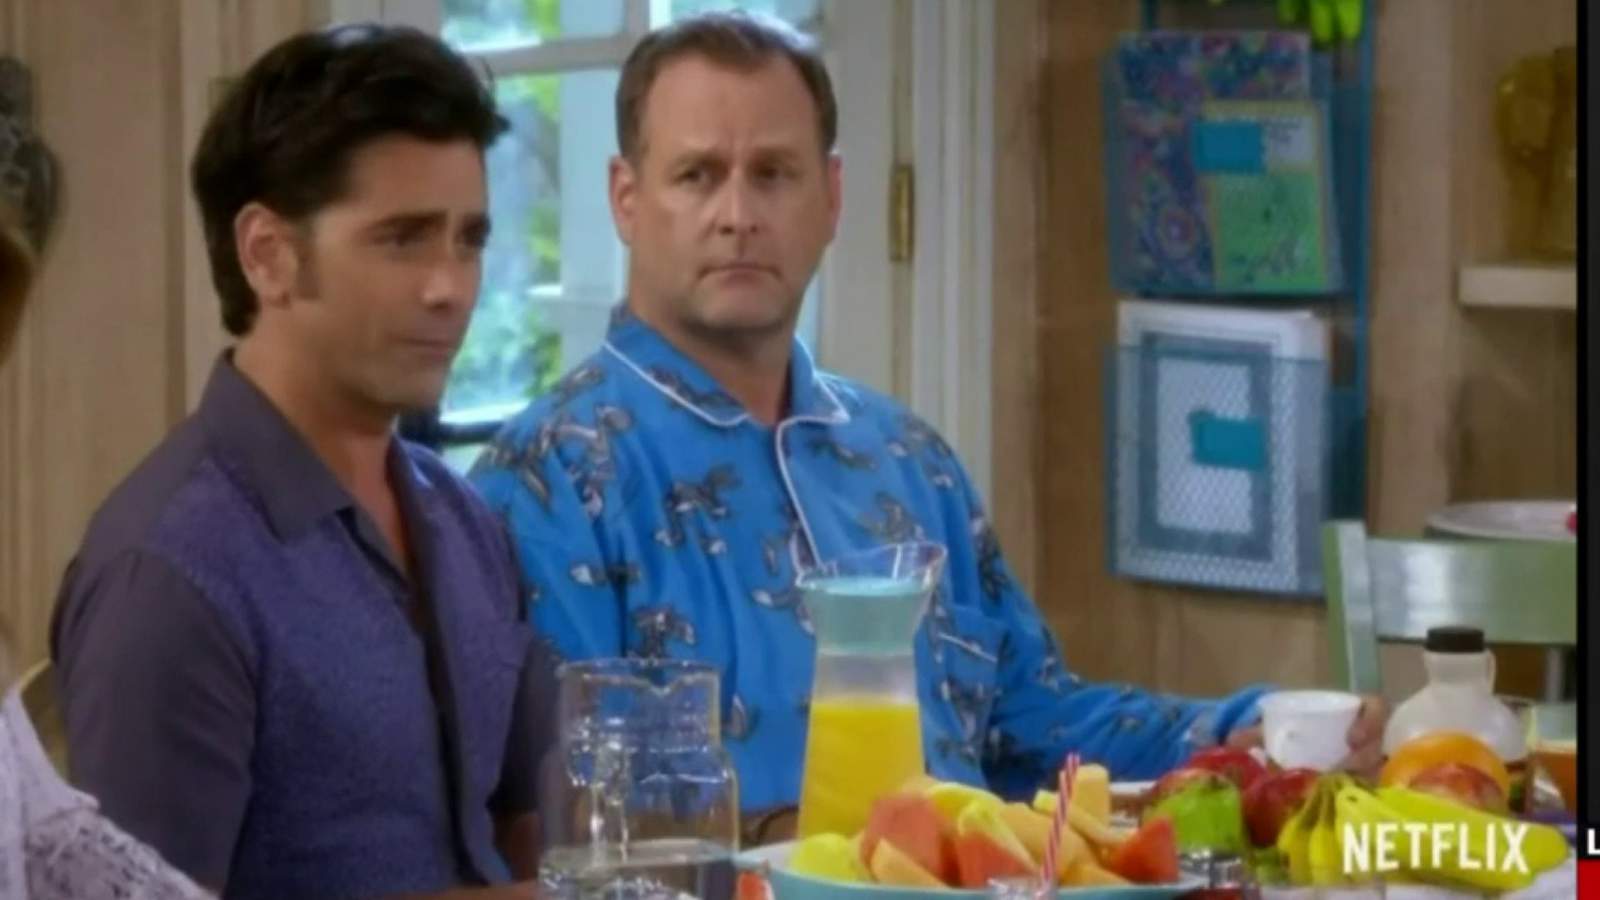 Actor Dave Coulier is zooming into something new